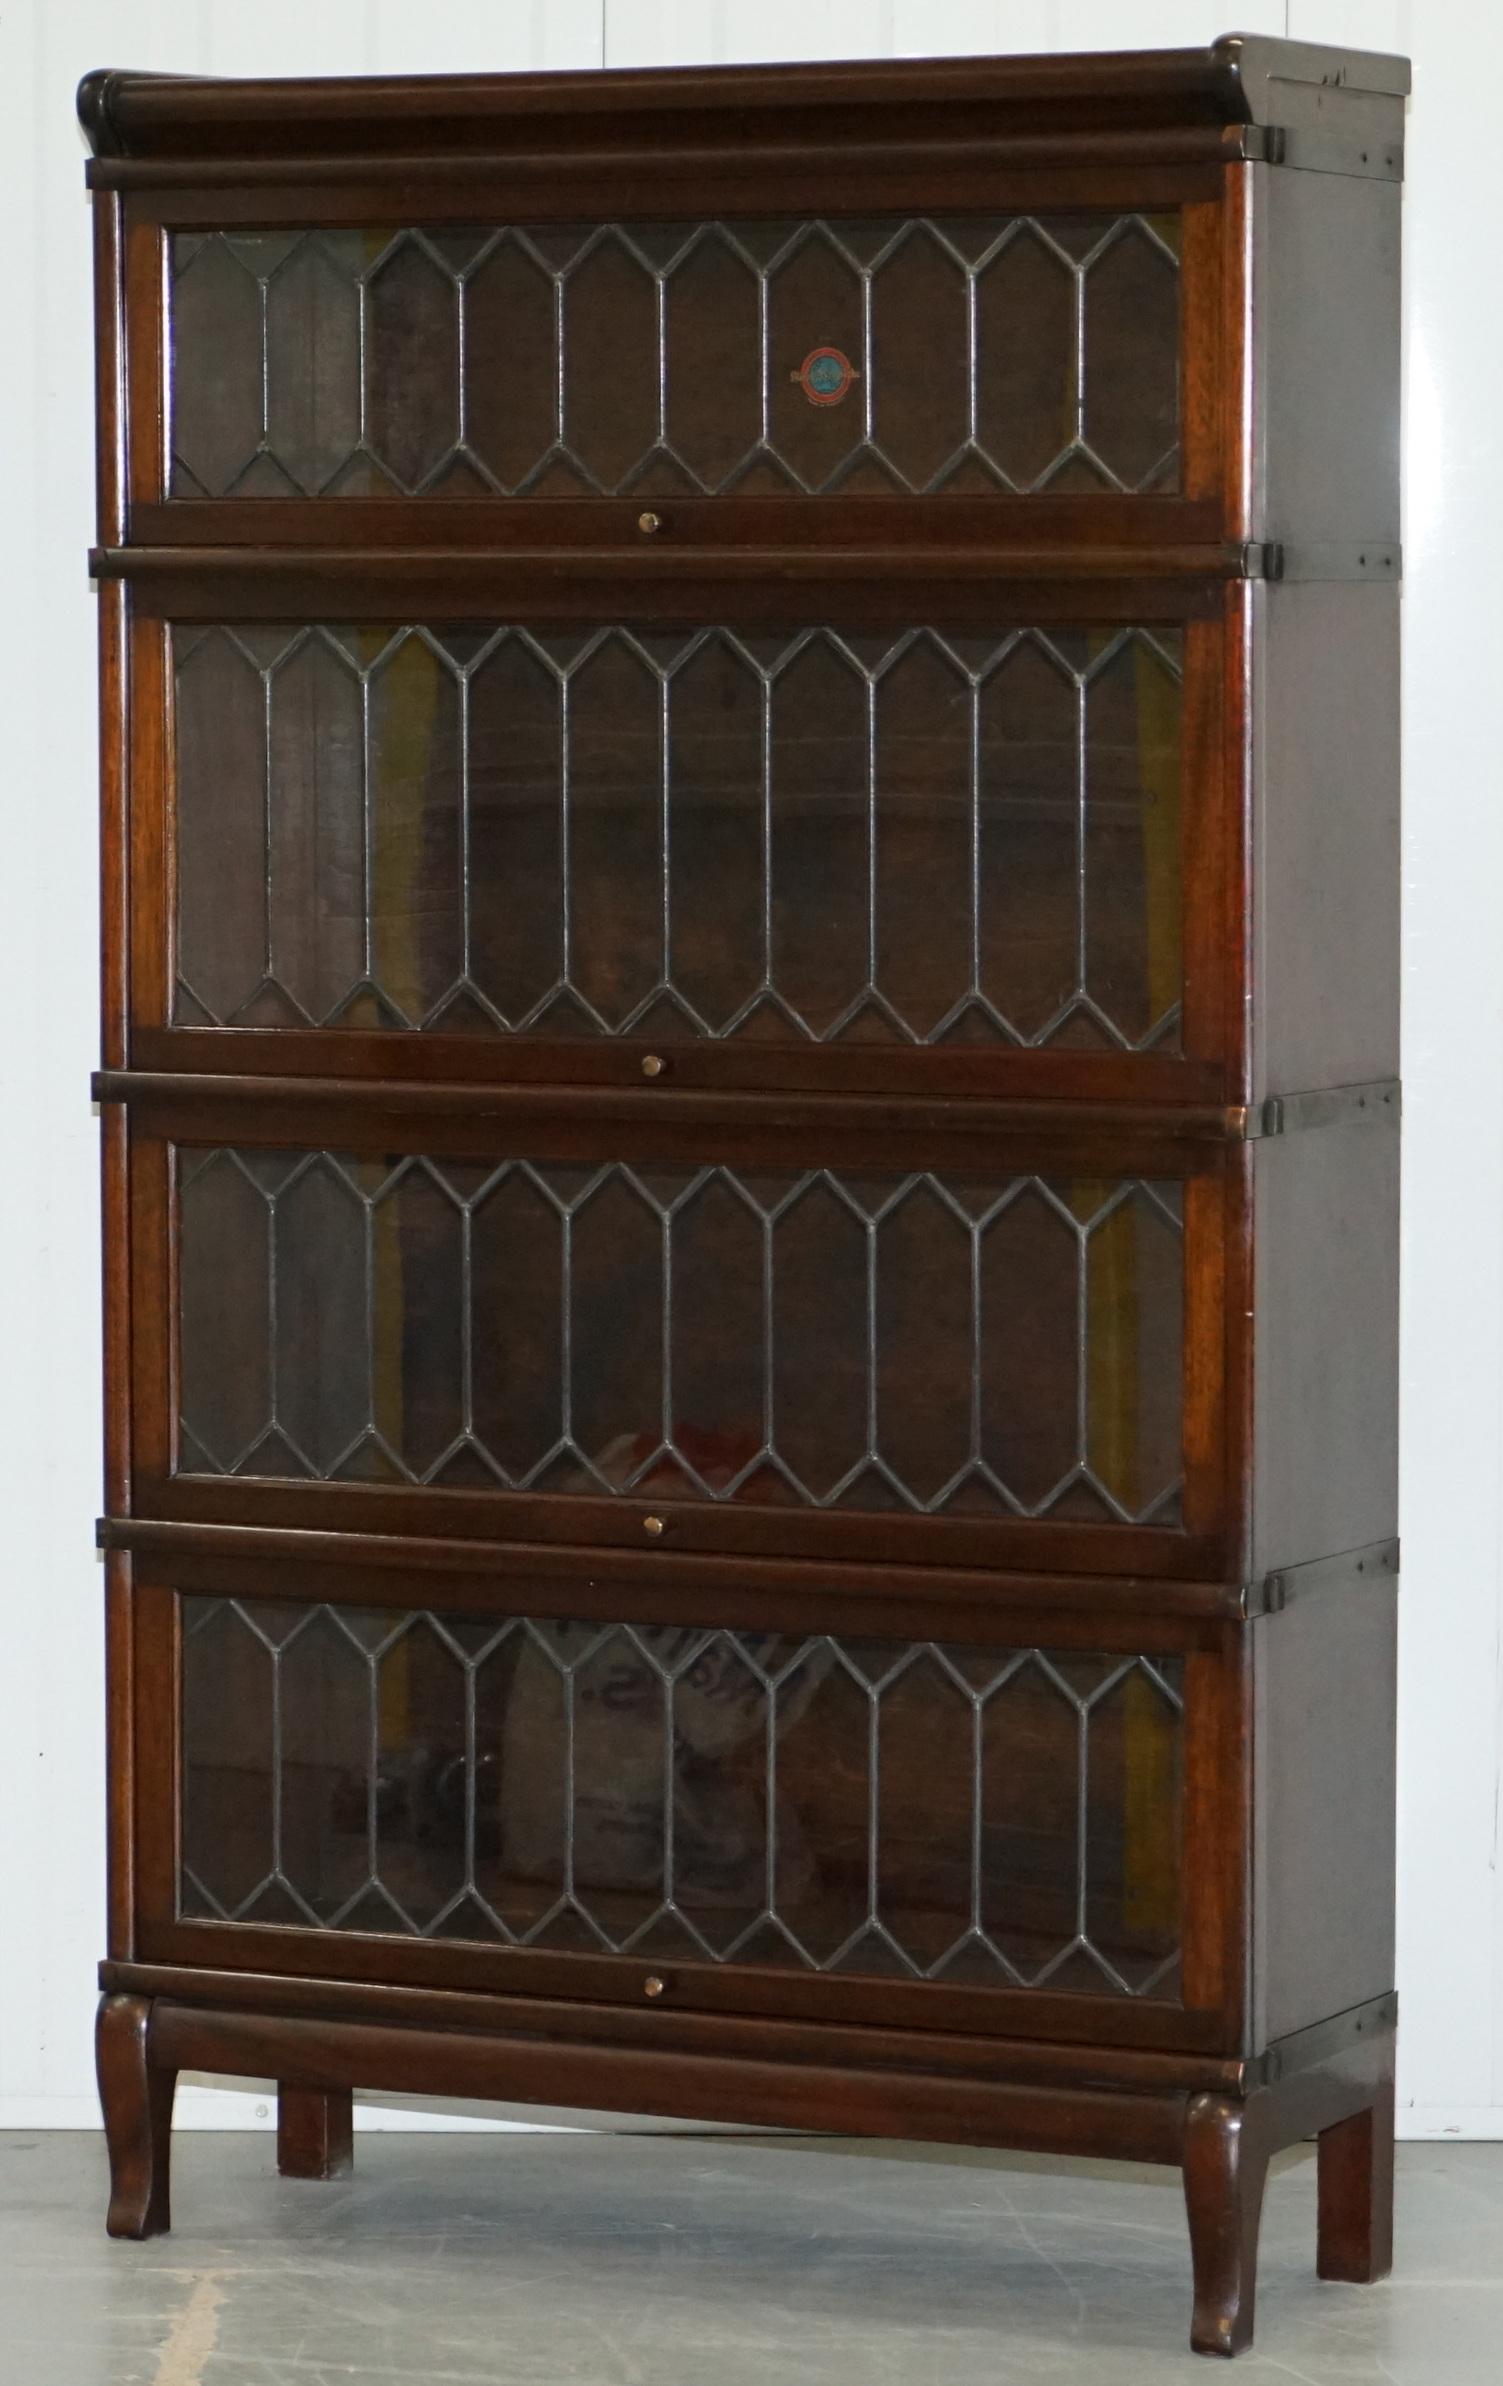 Victorian Rare Globe Wernicke Mahogany & Lead Lined Glass Legal Stacking Library Bookcase